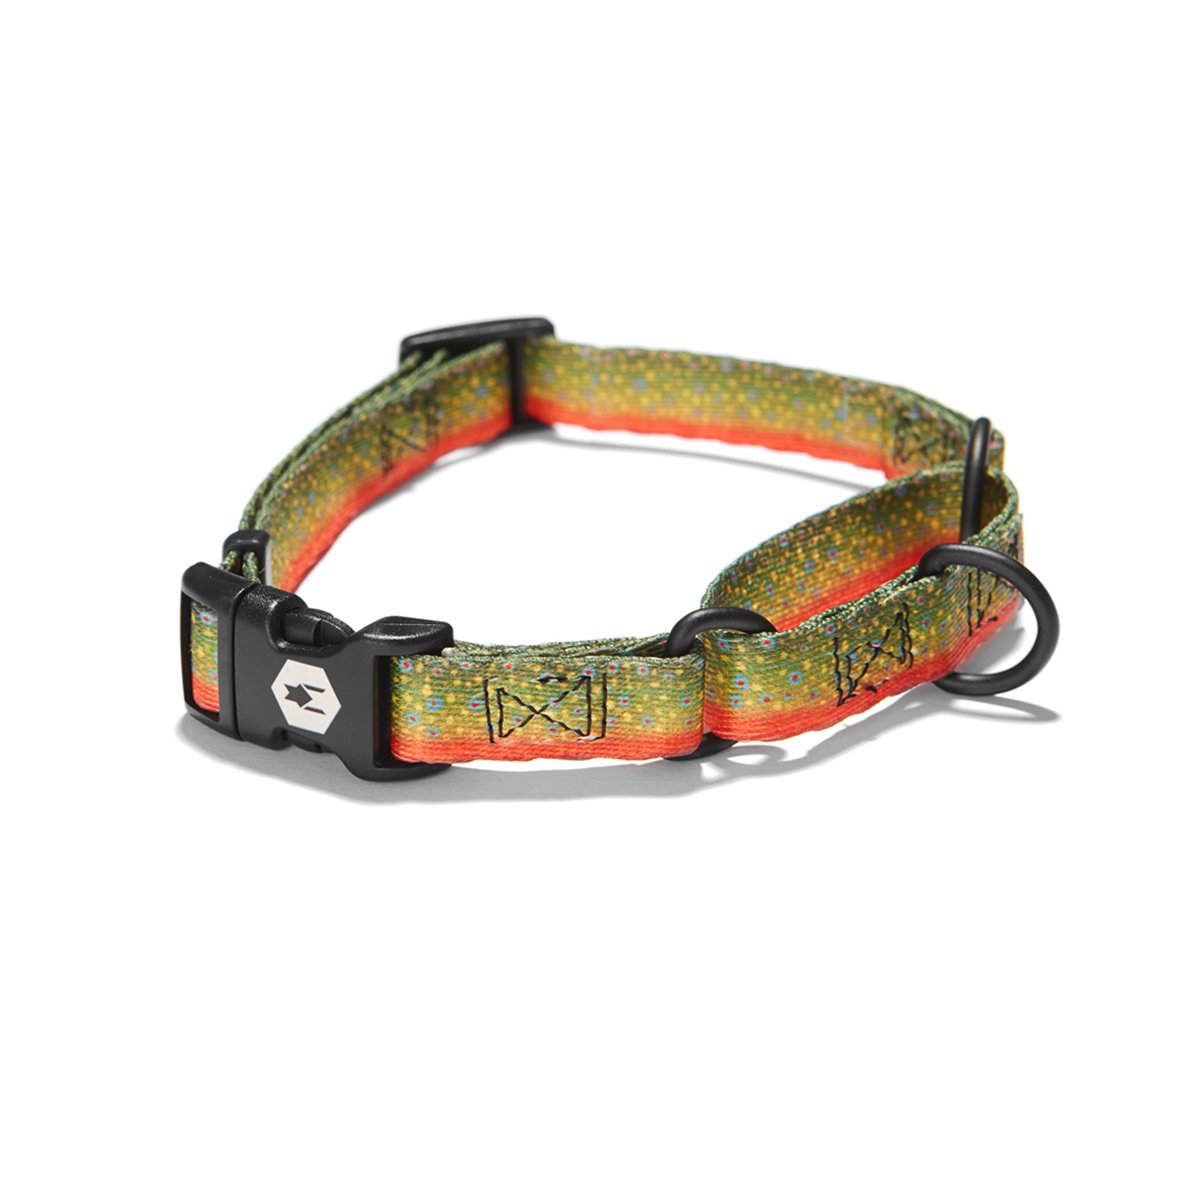 BrookTrout MARTINGALE DOG COLLAR Made in the USA by Wolfgang Man & Beast